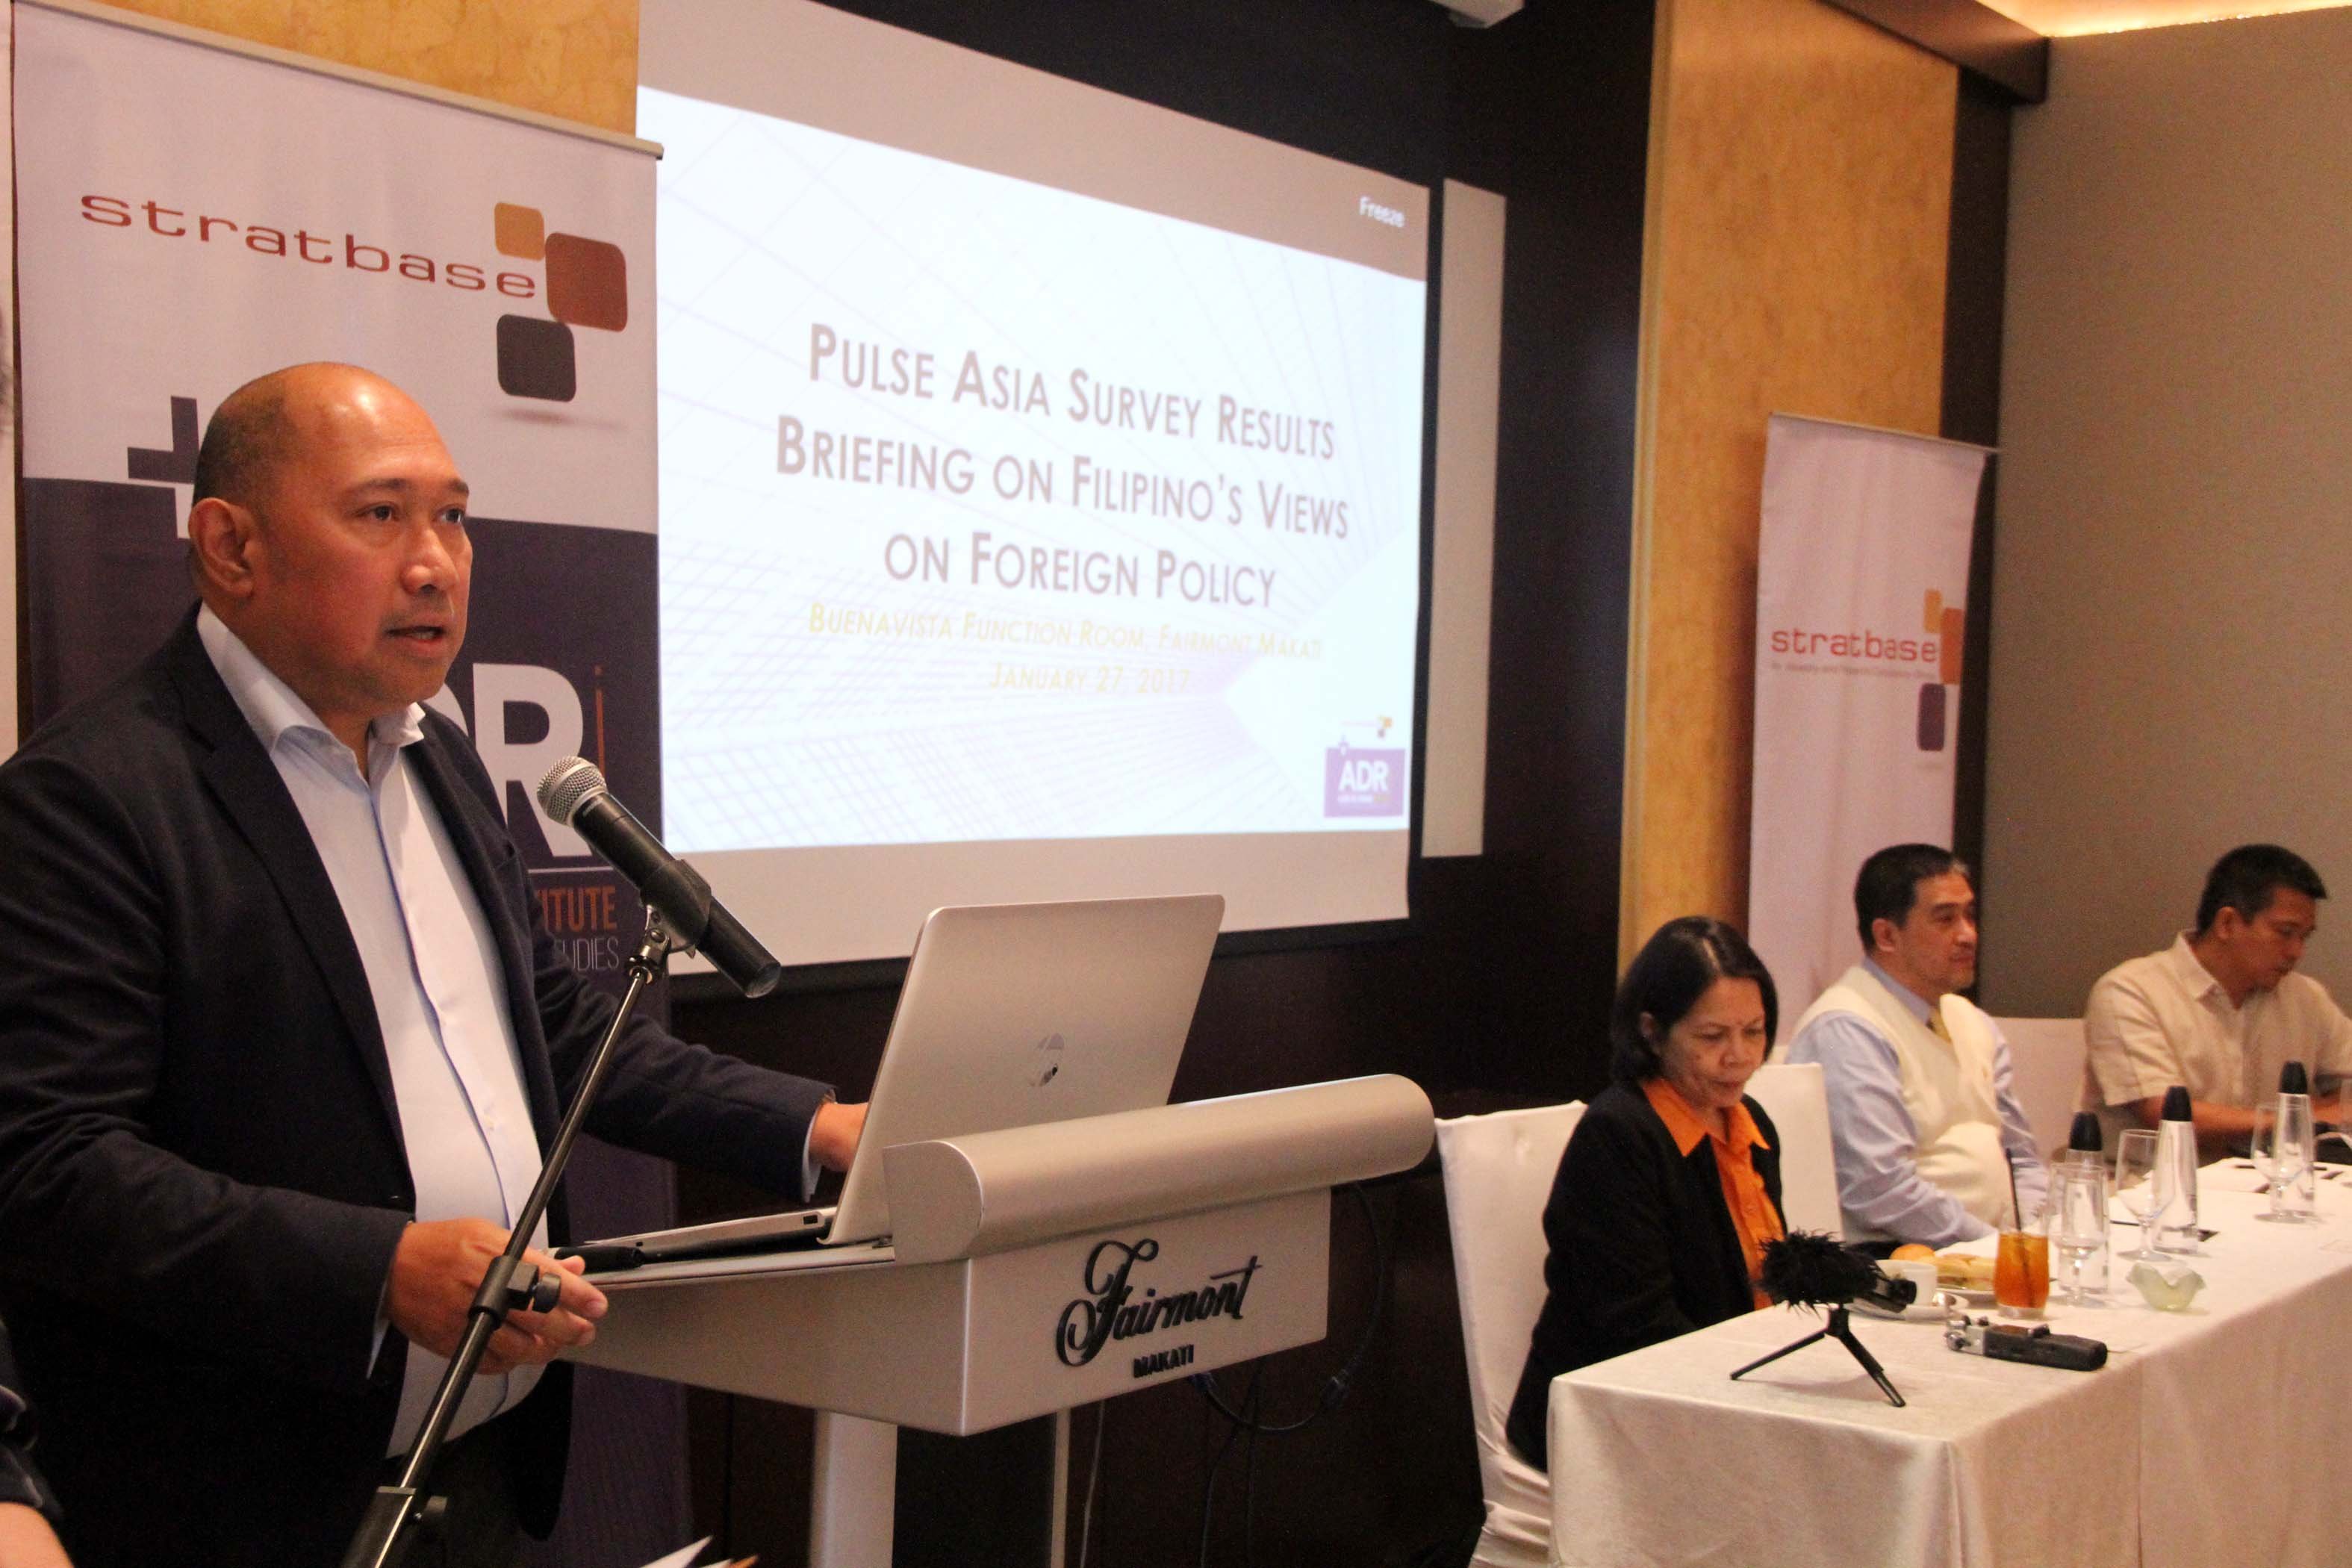 Pulse Asia survey on Filipino's views on foreign policy